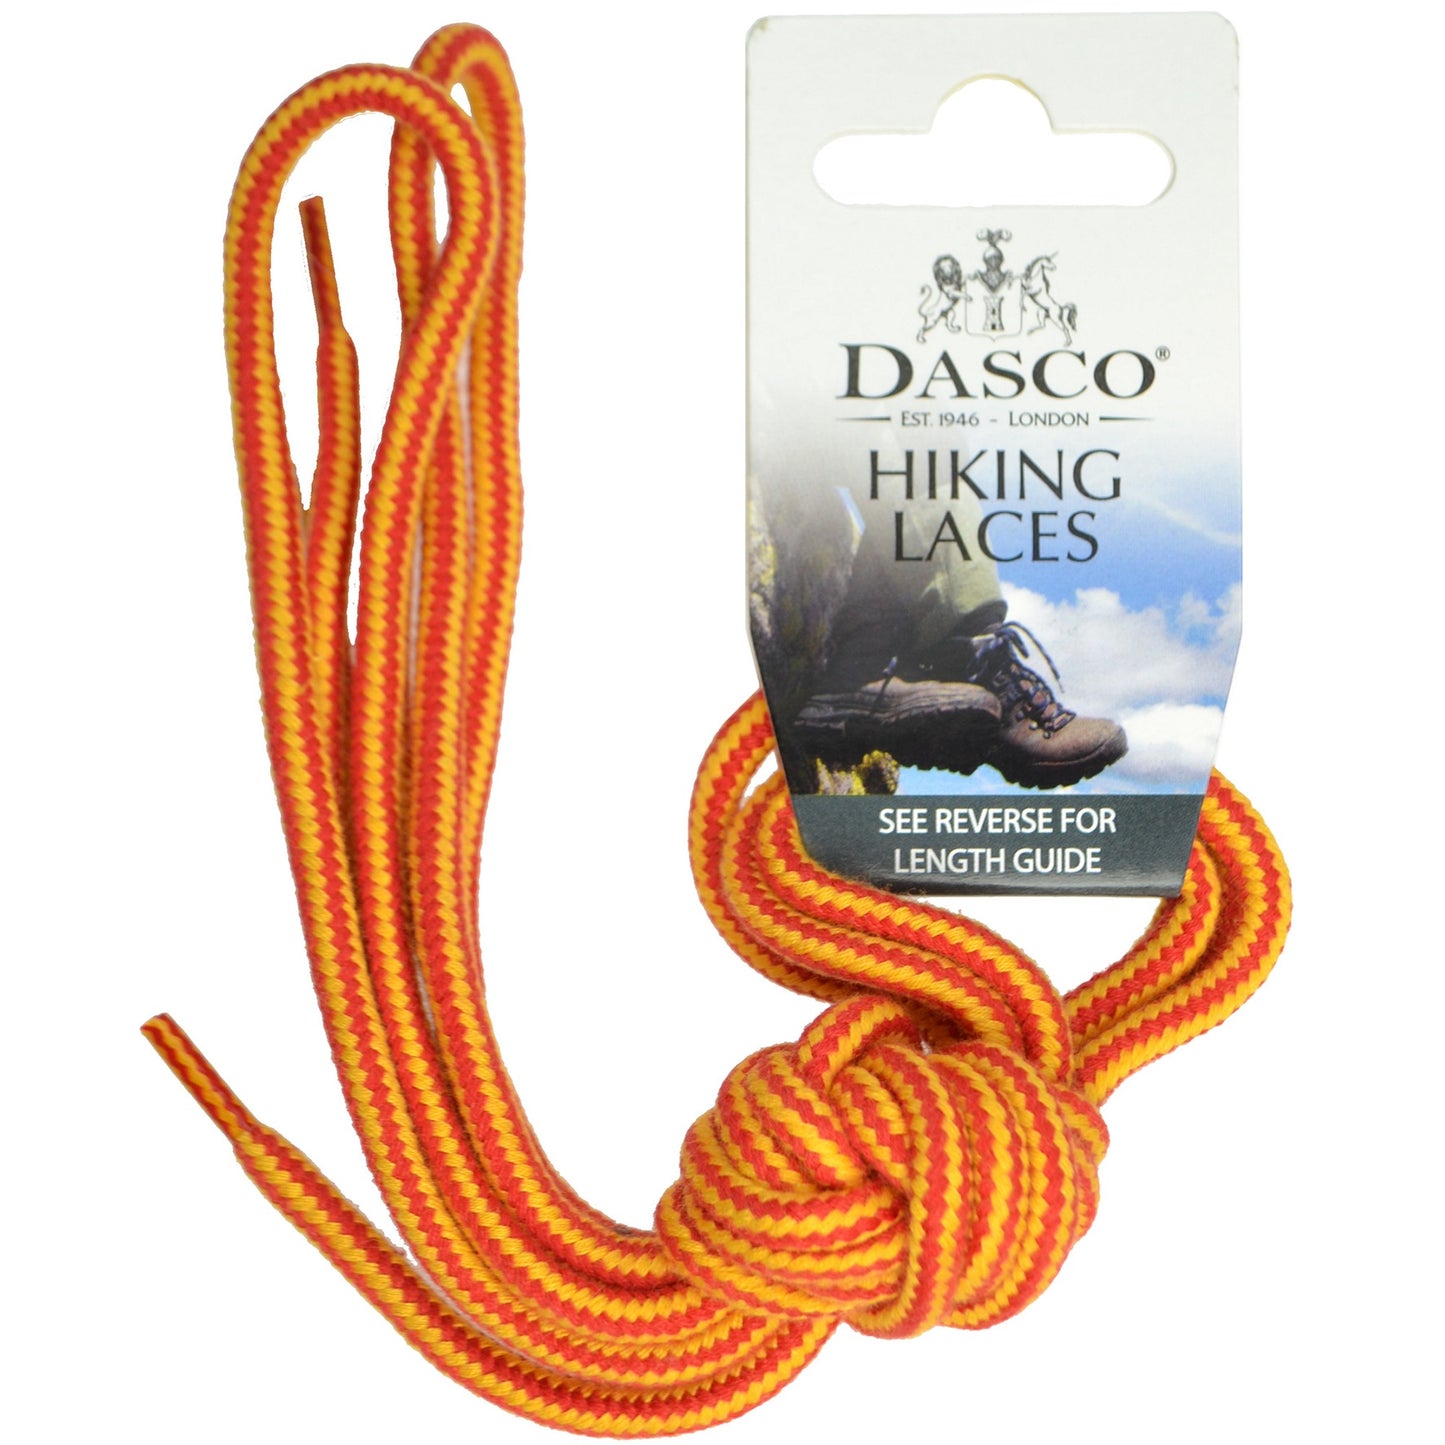 140cm Dasco Cord Hiking and Walking Boot Shoe Laces - Yellow & Red